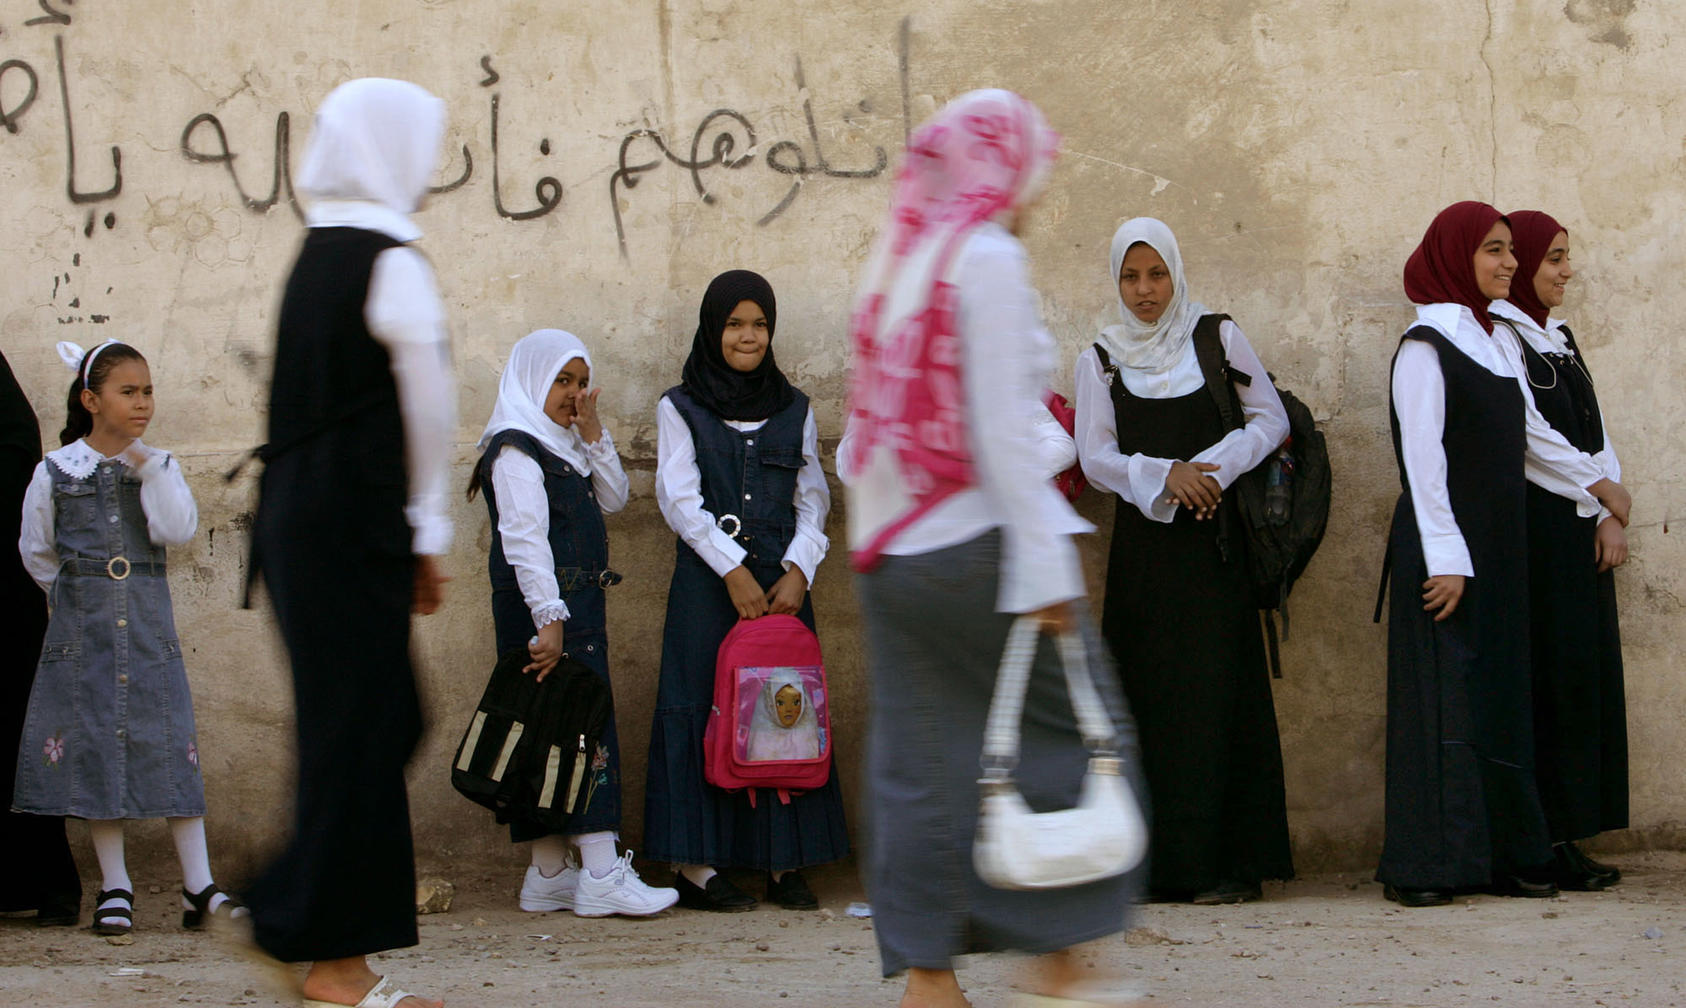 Girls wait to head to their classrooms at a school in Sadr City, the predominantly Shiite neighborhood of Baghdad, Wednesday, Sept. 20, 2006. Six million students nationwide returned to school on Wednesday morning after three months of summer vacations, according to Iraqi ministry of education.